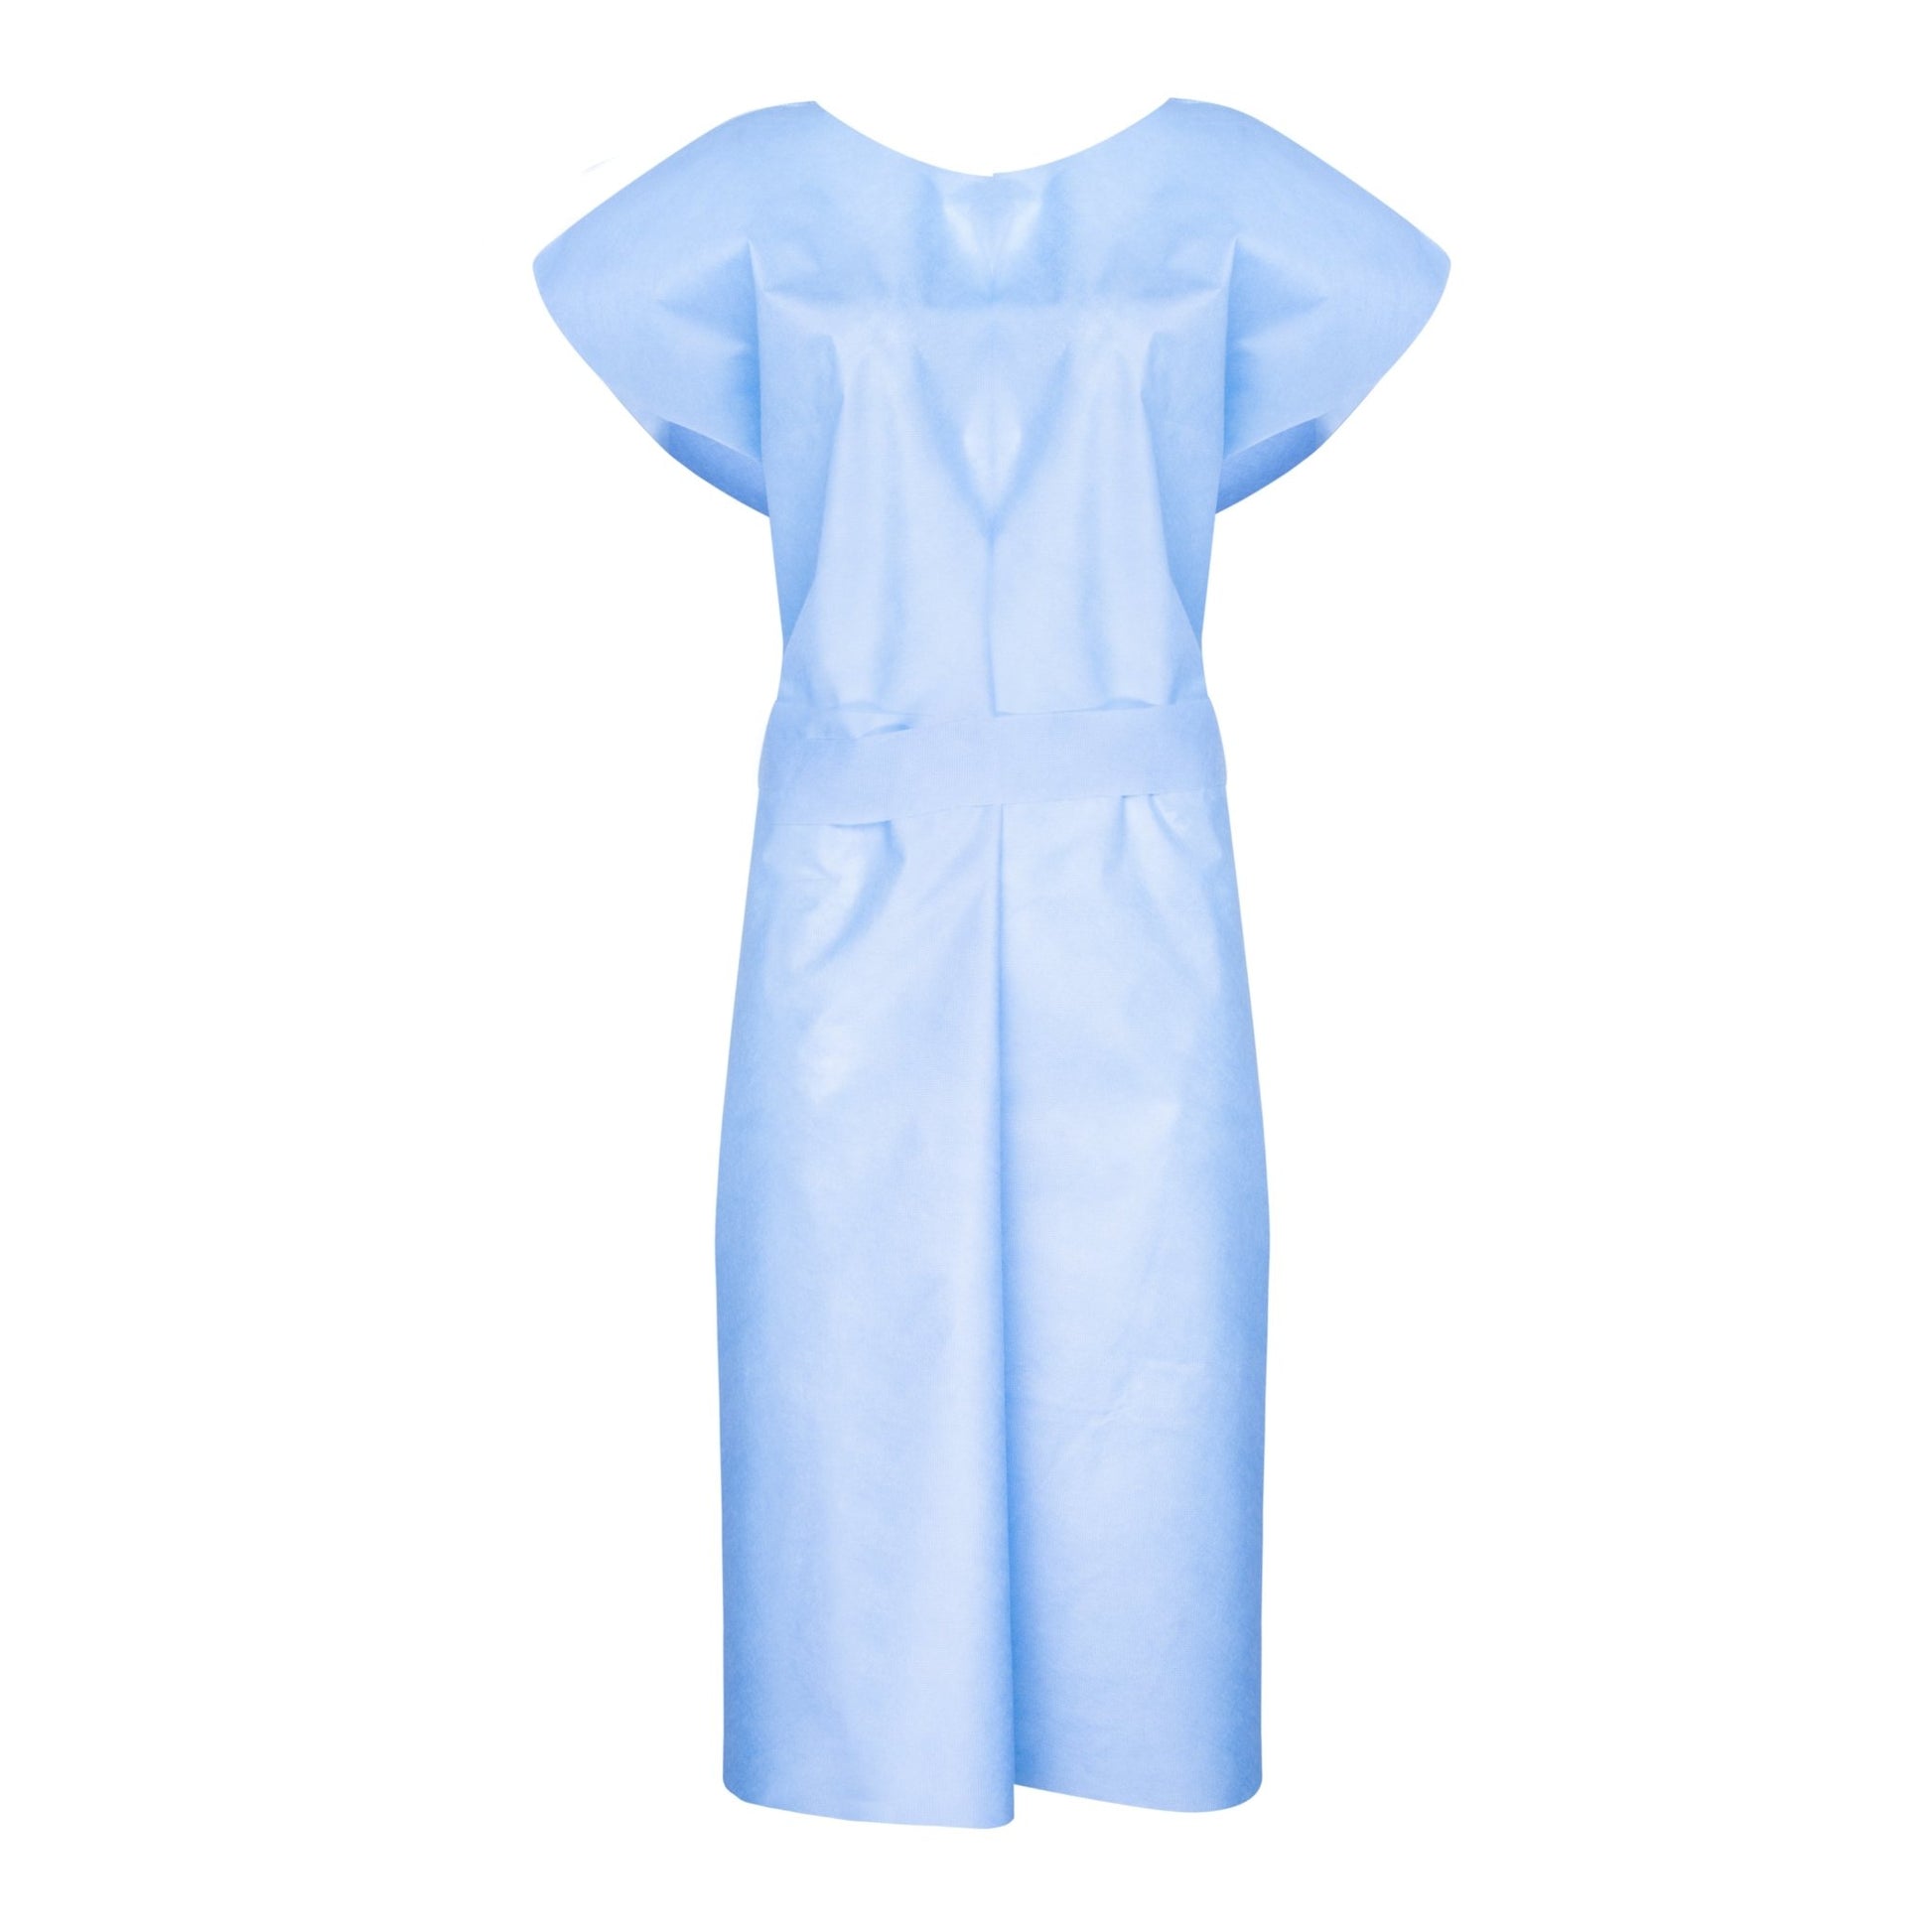 Pediatric Exam Gowns - Disposable - 25 Pack - DisposableGowns.com